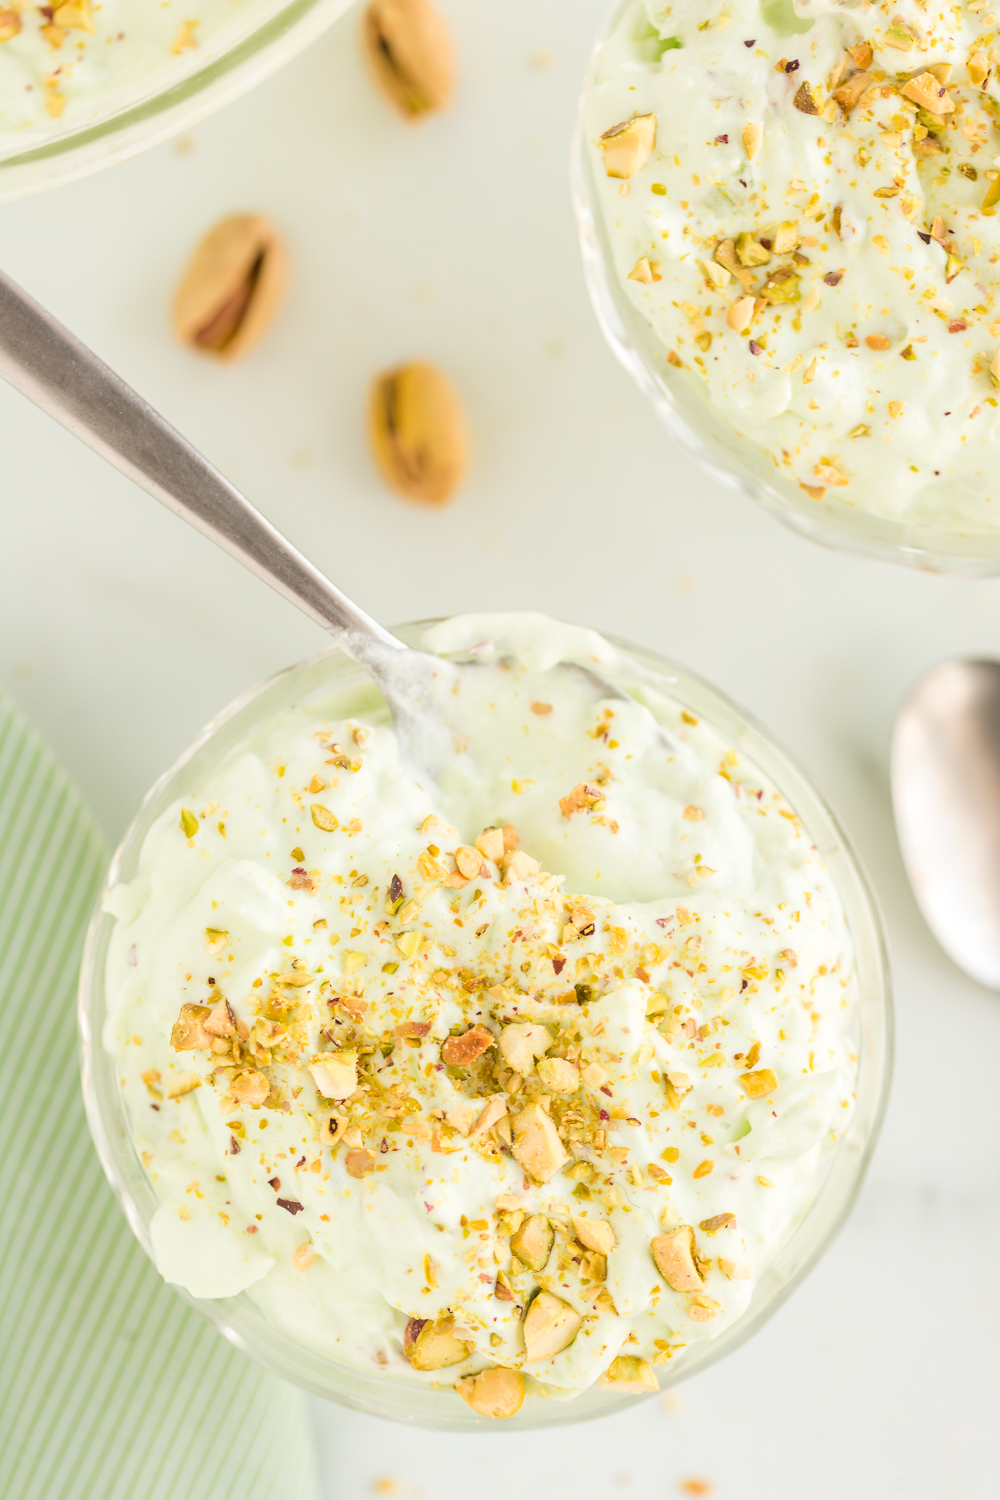 Pistachio Pudding Salad - pistachio pudding, crushed pineapple, and Cool Whip makes this a cool and refreshing pudding treat that will be a hit at any gathering!